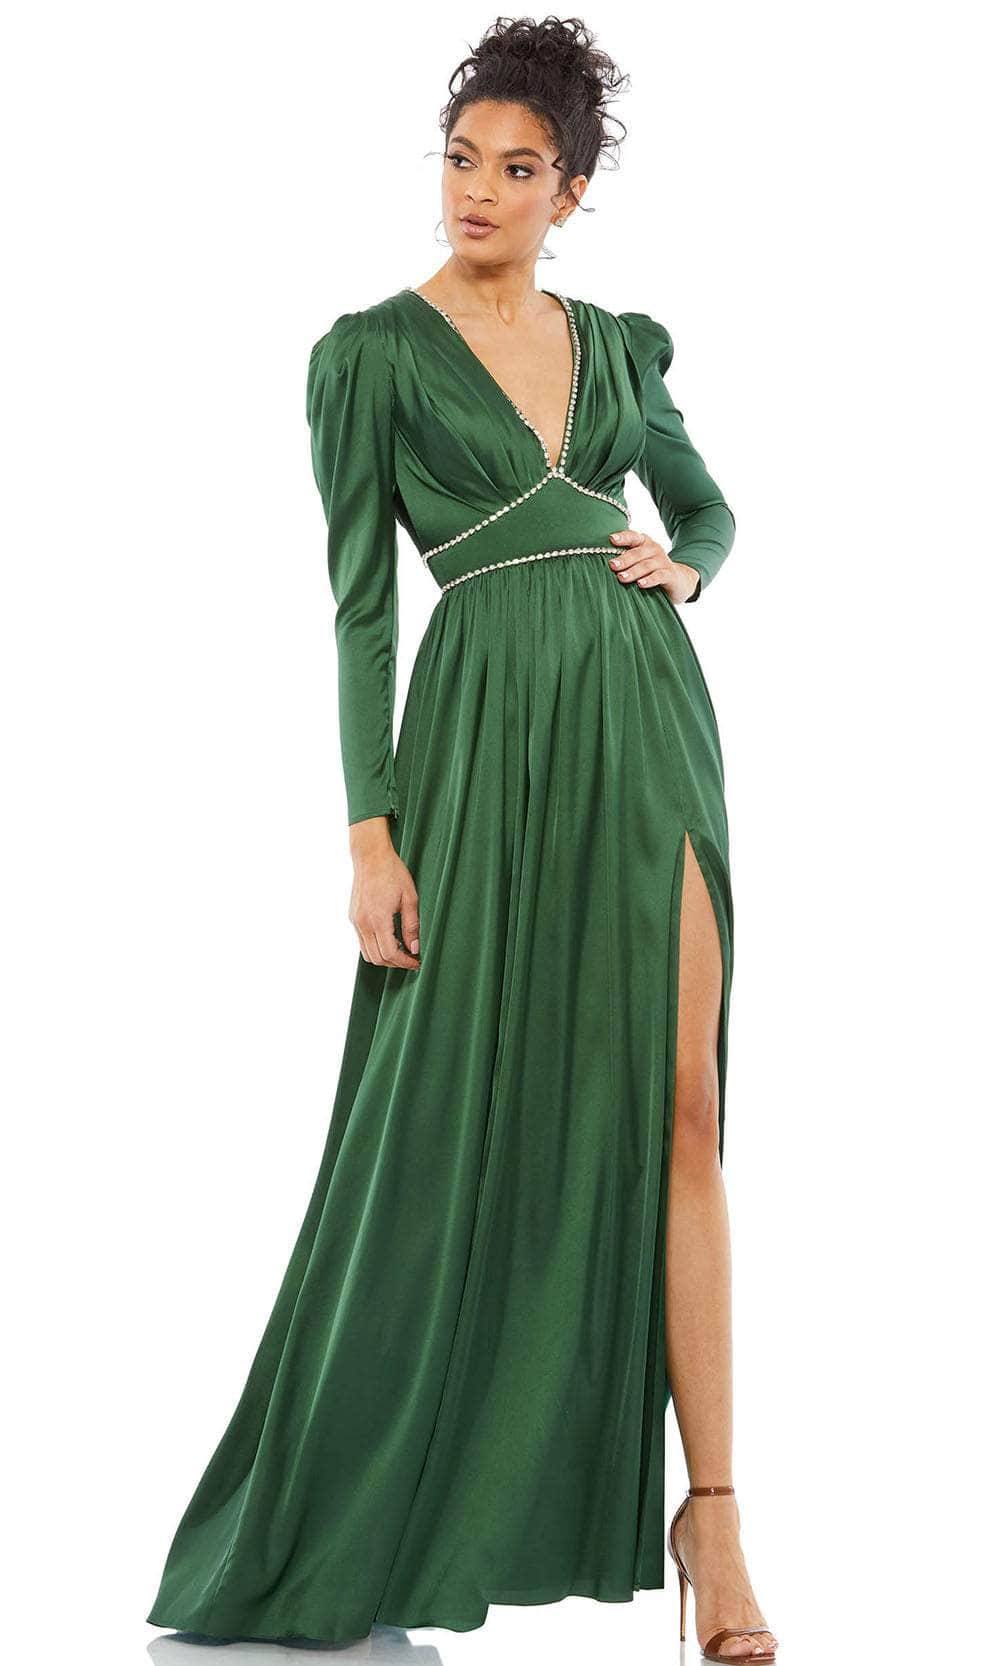 Ieena Duggal 55702 - Puffed Sleeve Evening Gown With Slit
